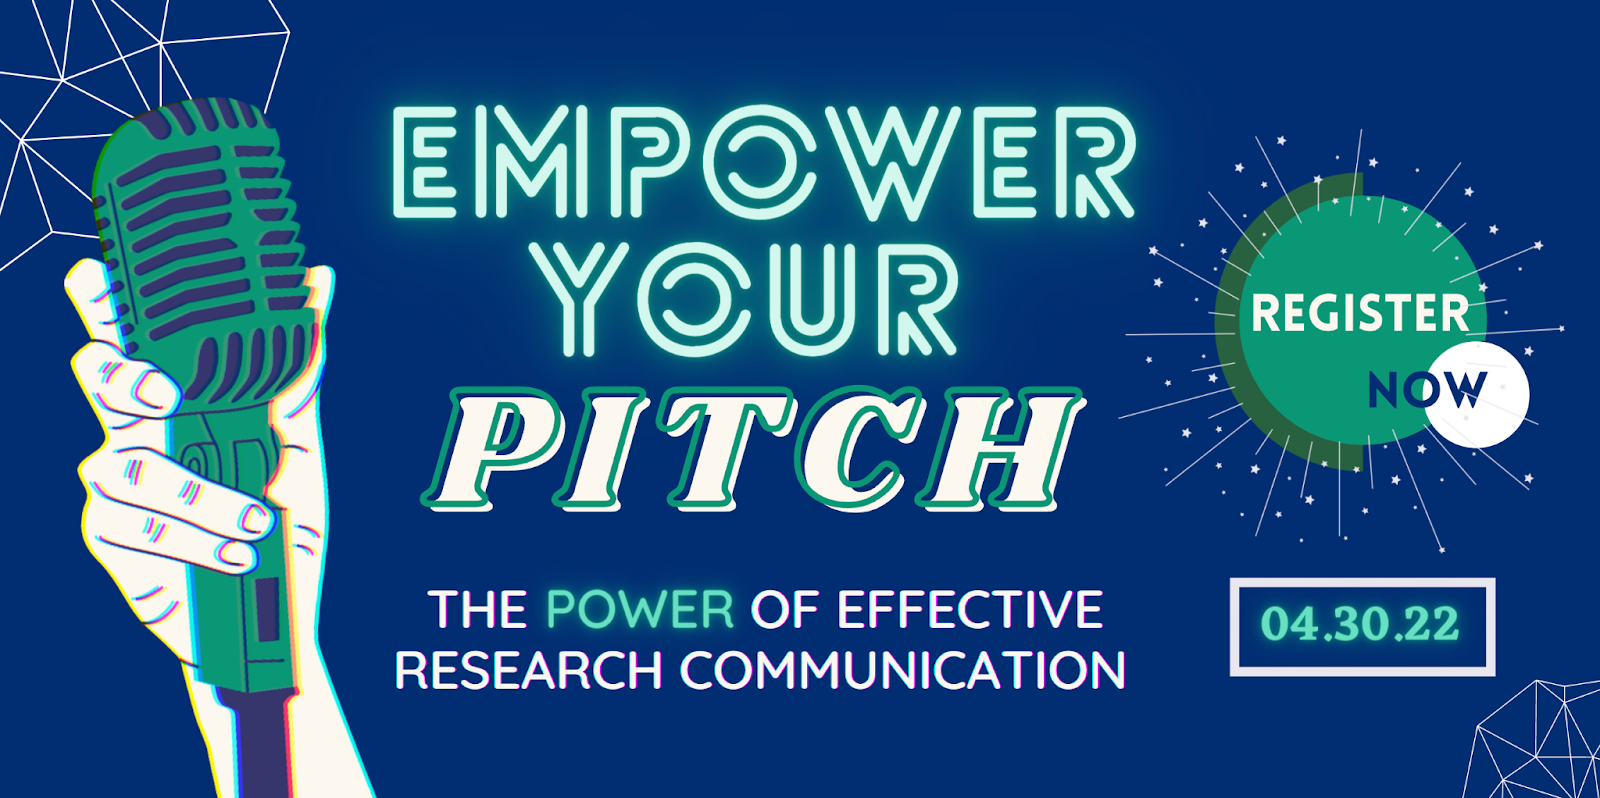 Empower Your Pitch - the power of effective research communication. Register now.